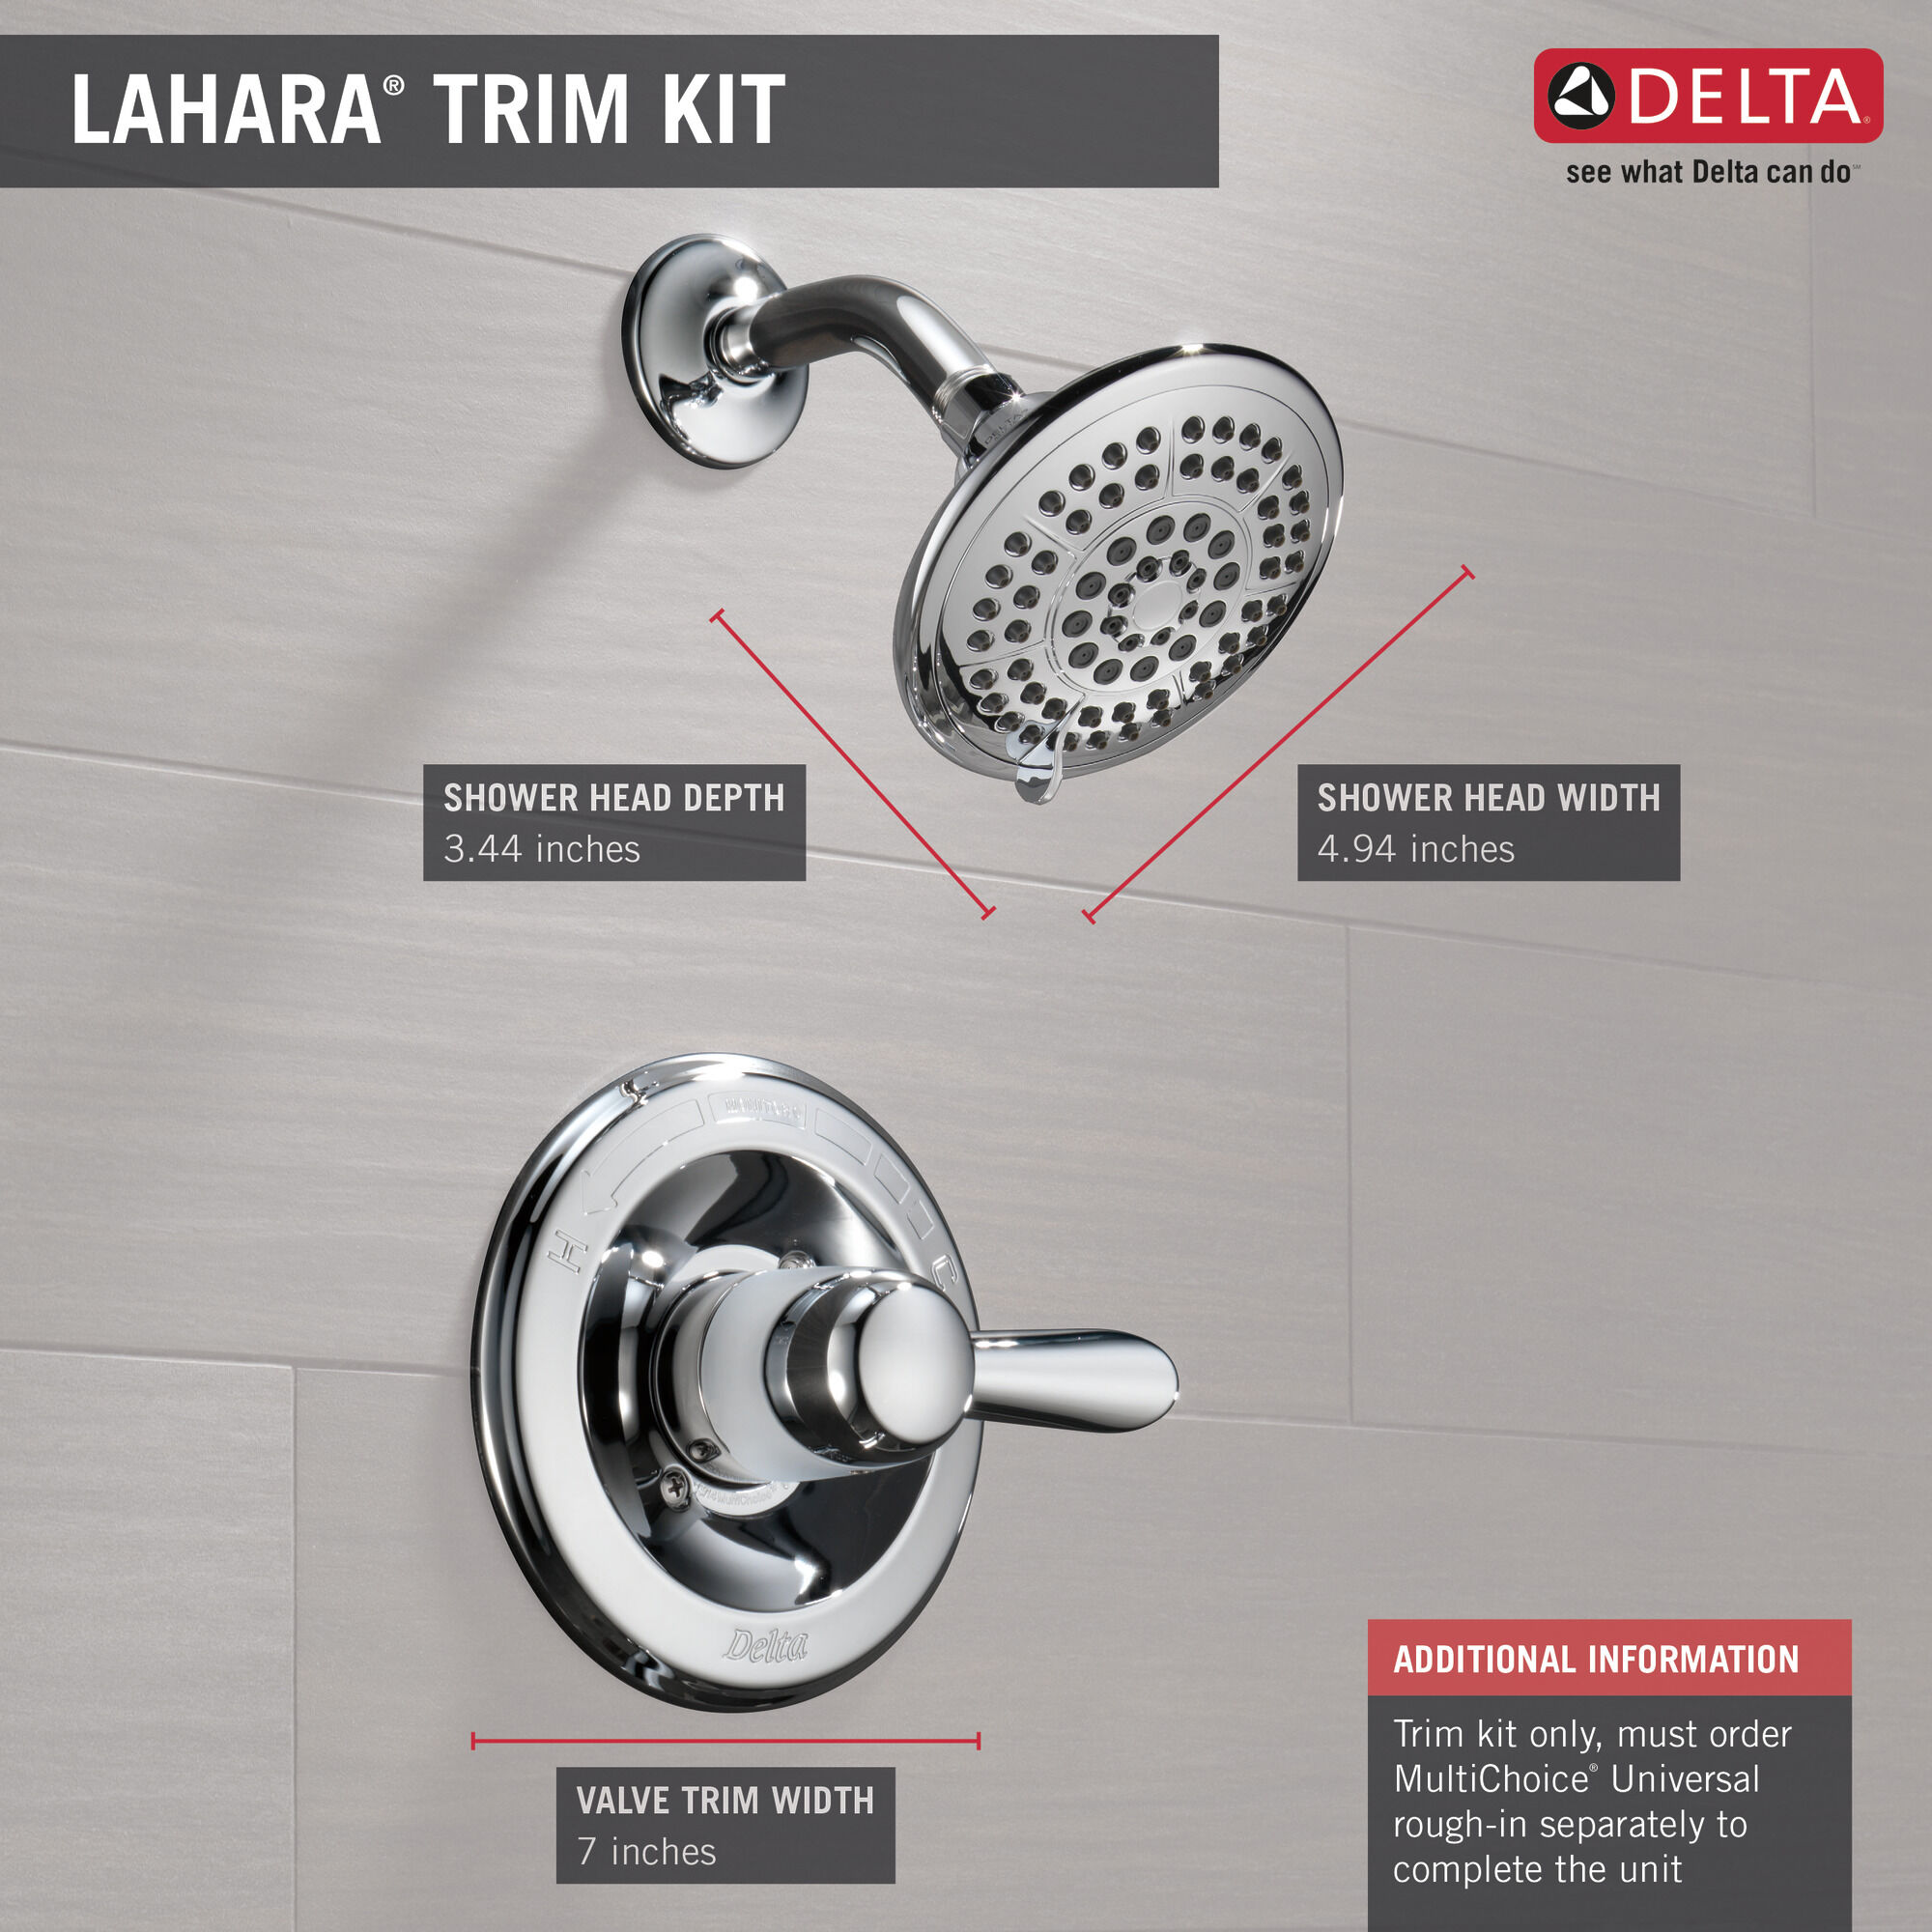 Monitor® 14 Series Shower Trim in Chrome T14238 | Delta Faucet